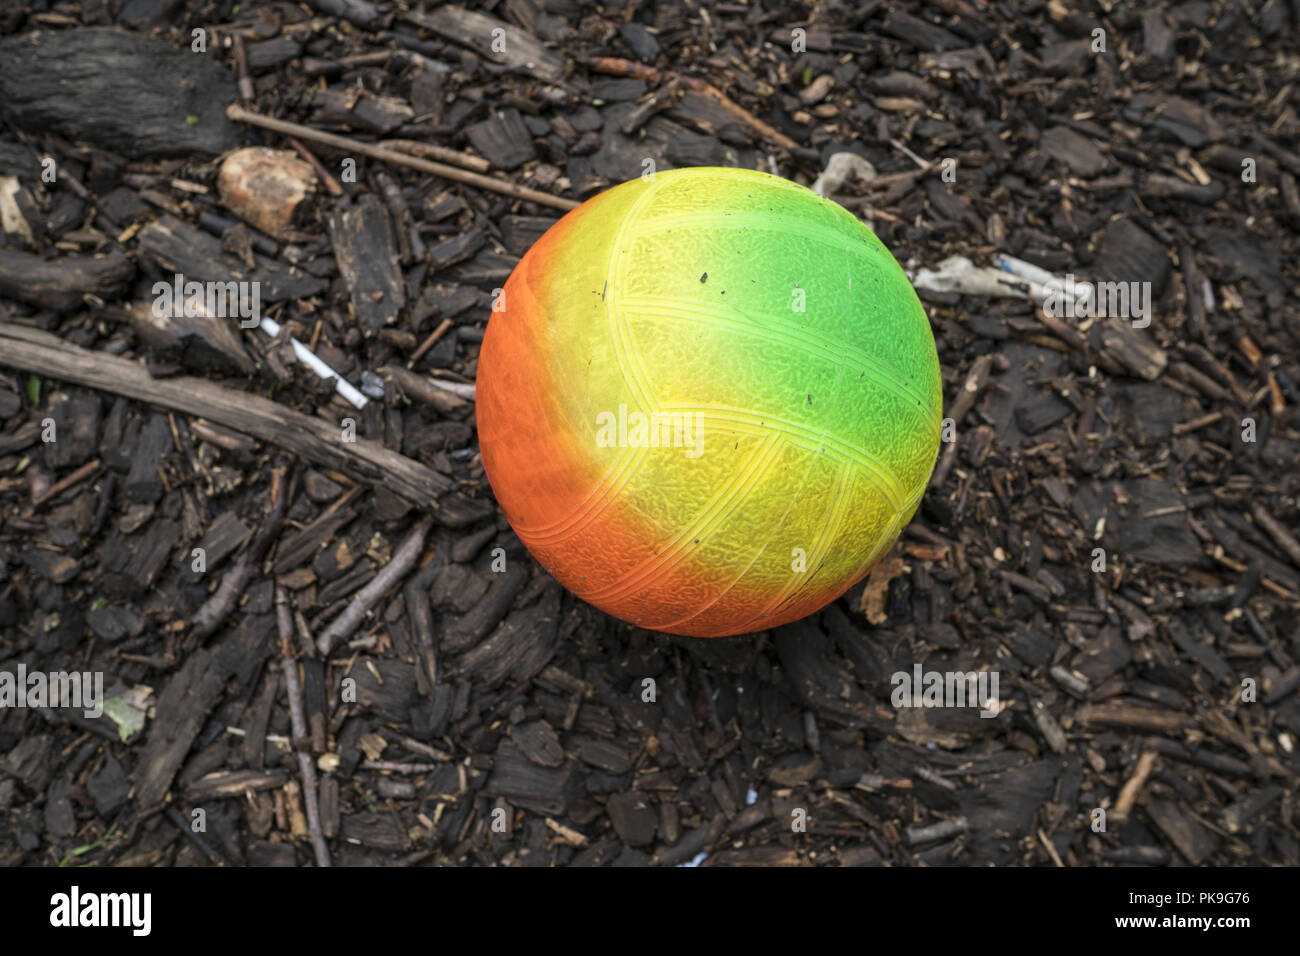 Colorful iridescent soccer ball. Stock Photo